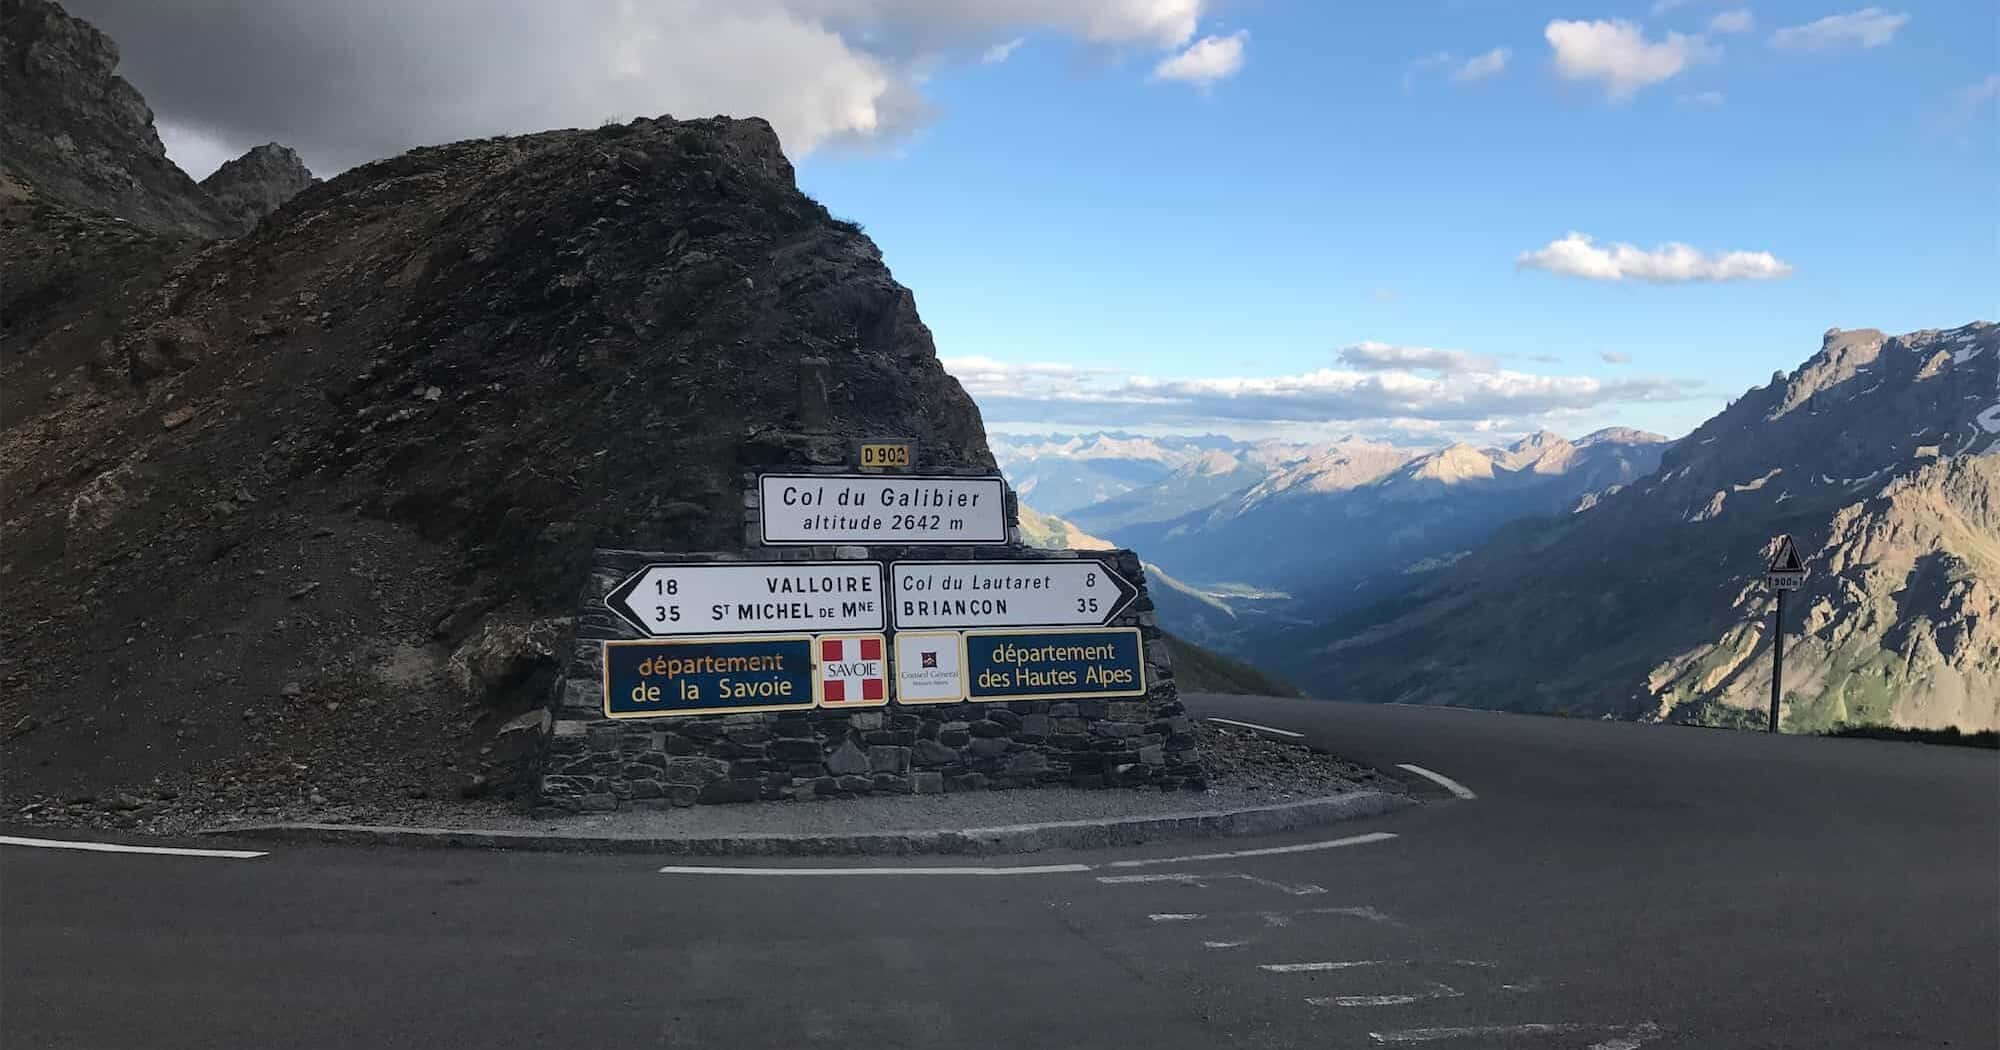 cropped col du galibier summit marker and road signs.jpg